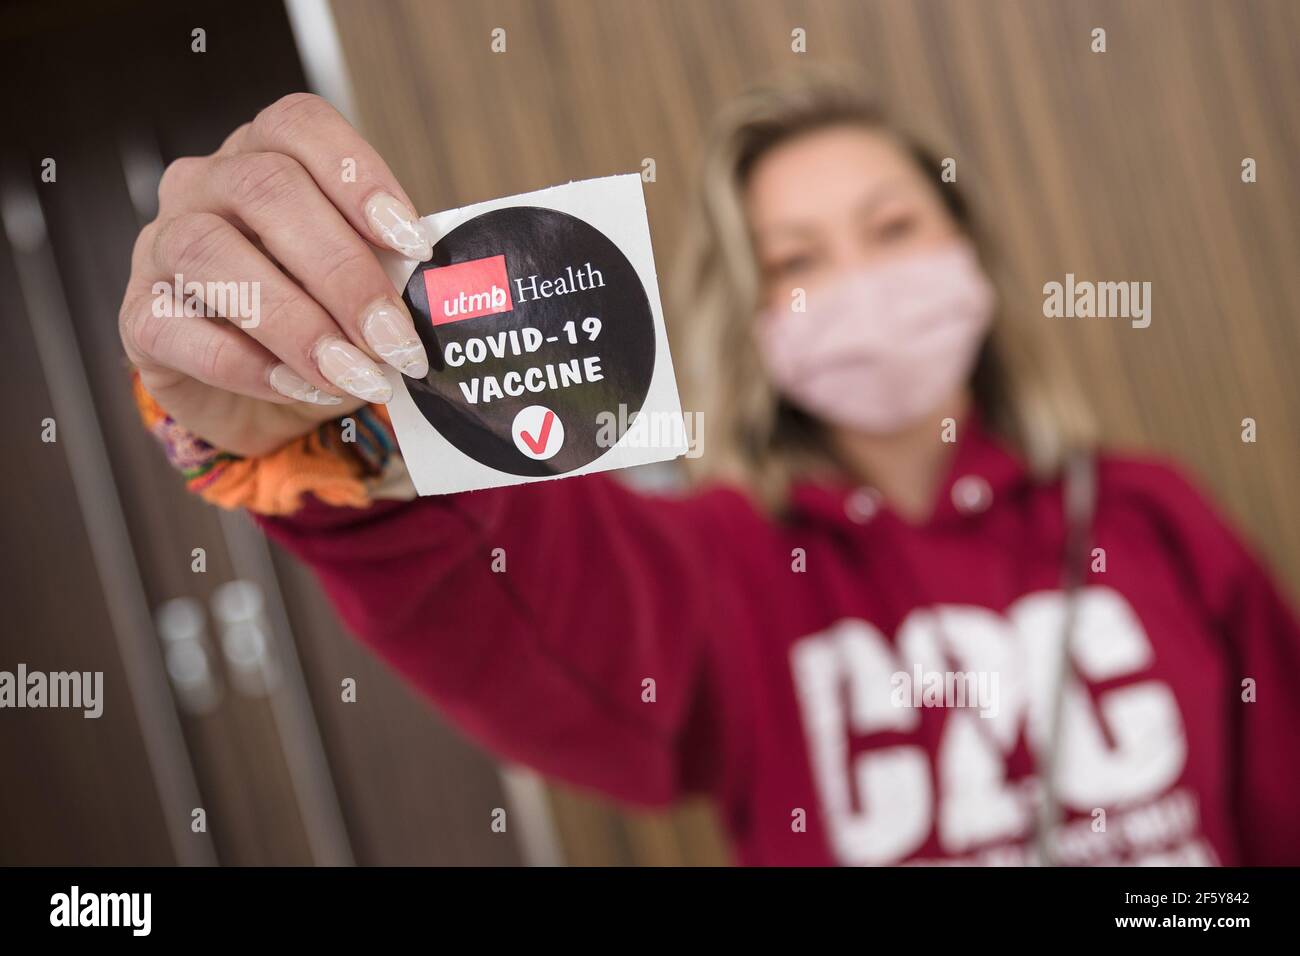 Lake Jackson, Texas, USA. 28th Mar, 2021. A patient displays a sticker proclaiming her recent COVID-19 inoculation during a mass vaccination event held by the University of Texas Medical Branch (UTMB Health) at Brazosport College in Lake Jackson, Texas. Prentice C. James/CSM/Alamy Live News Stock Photo